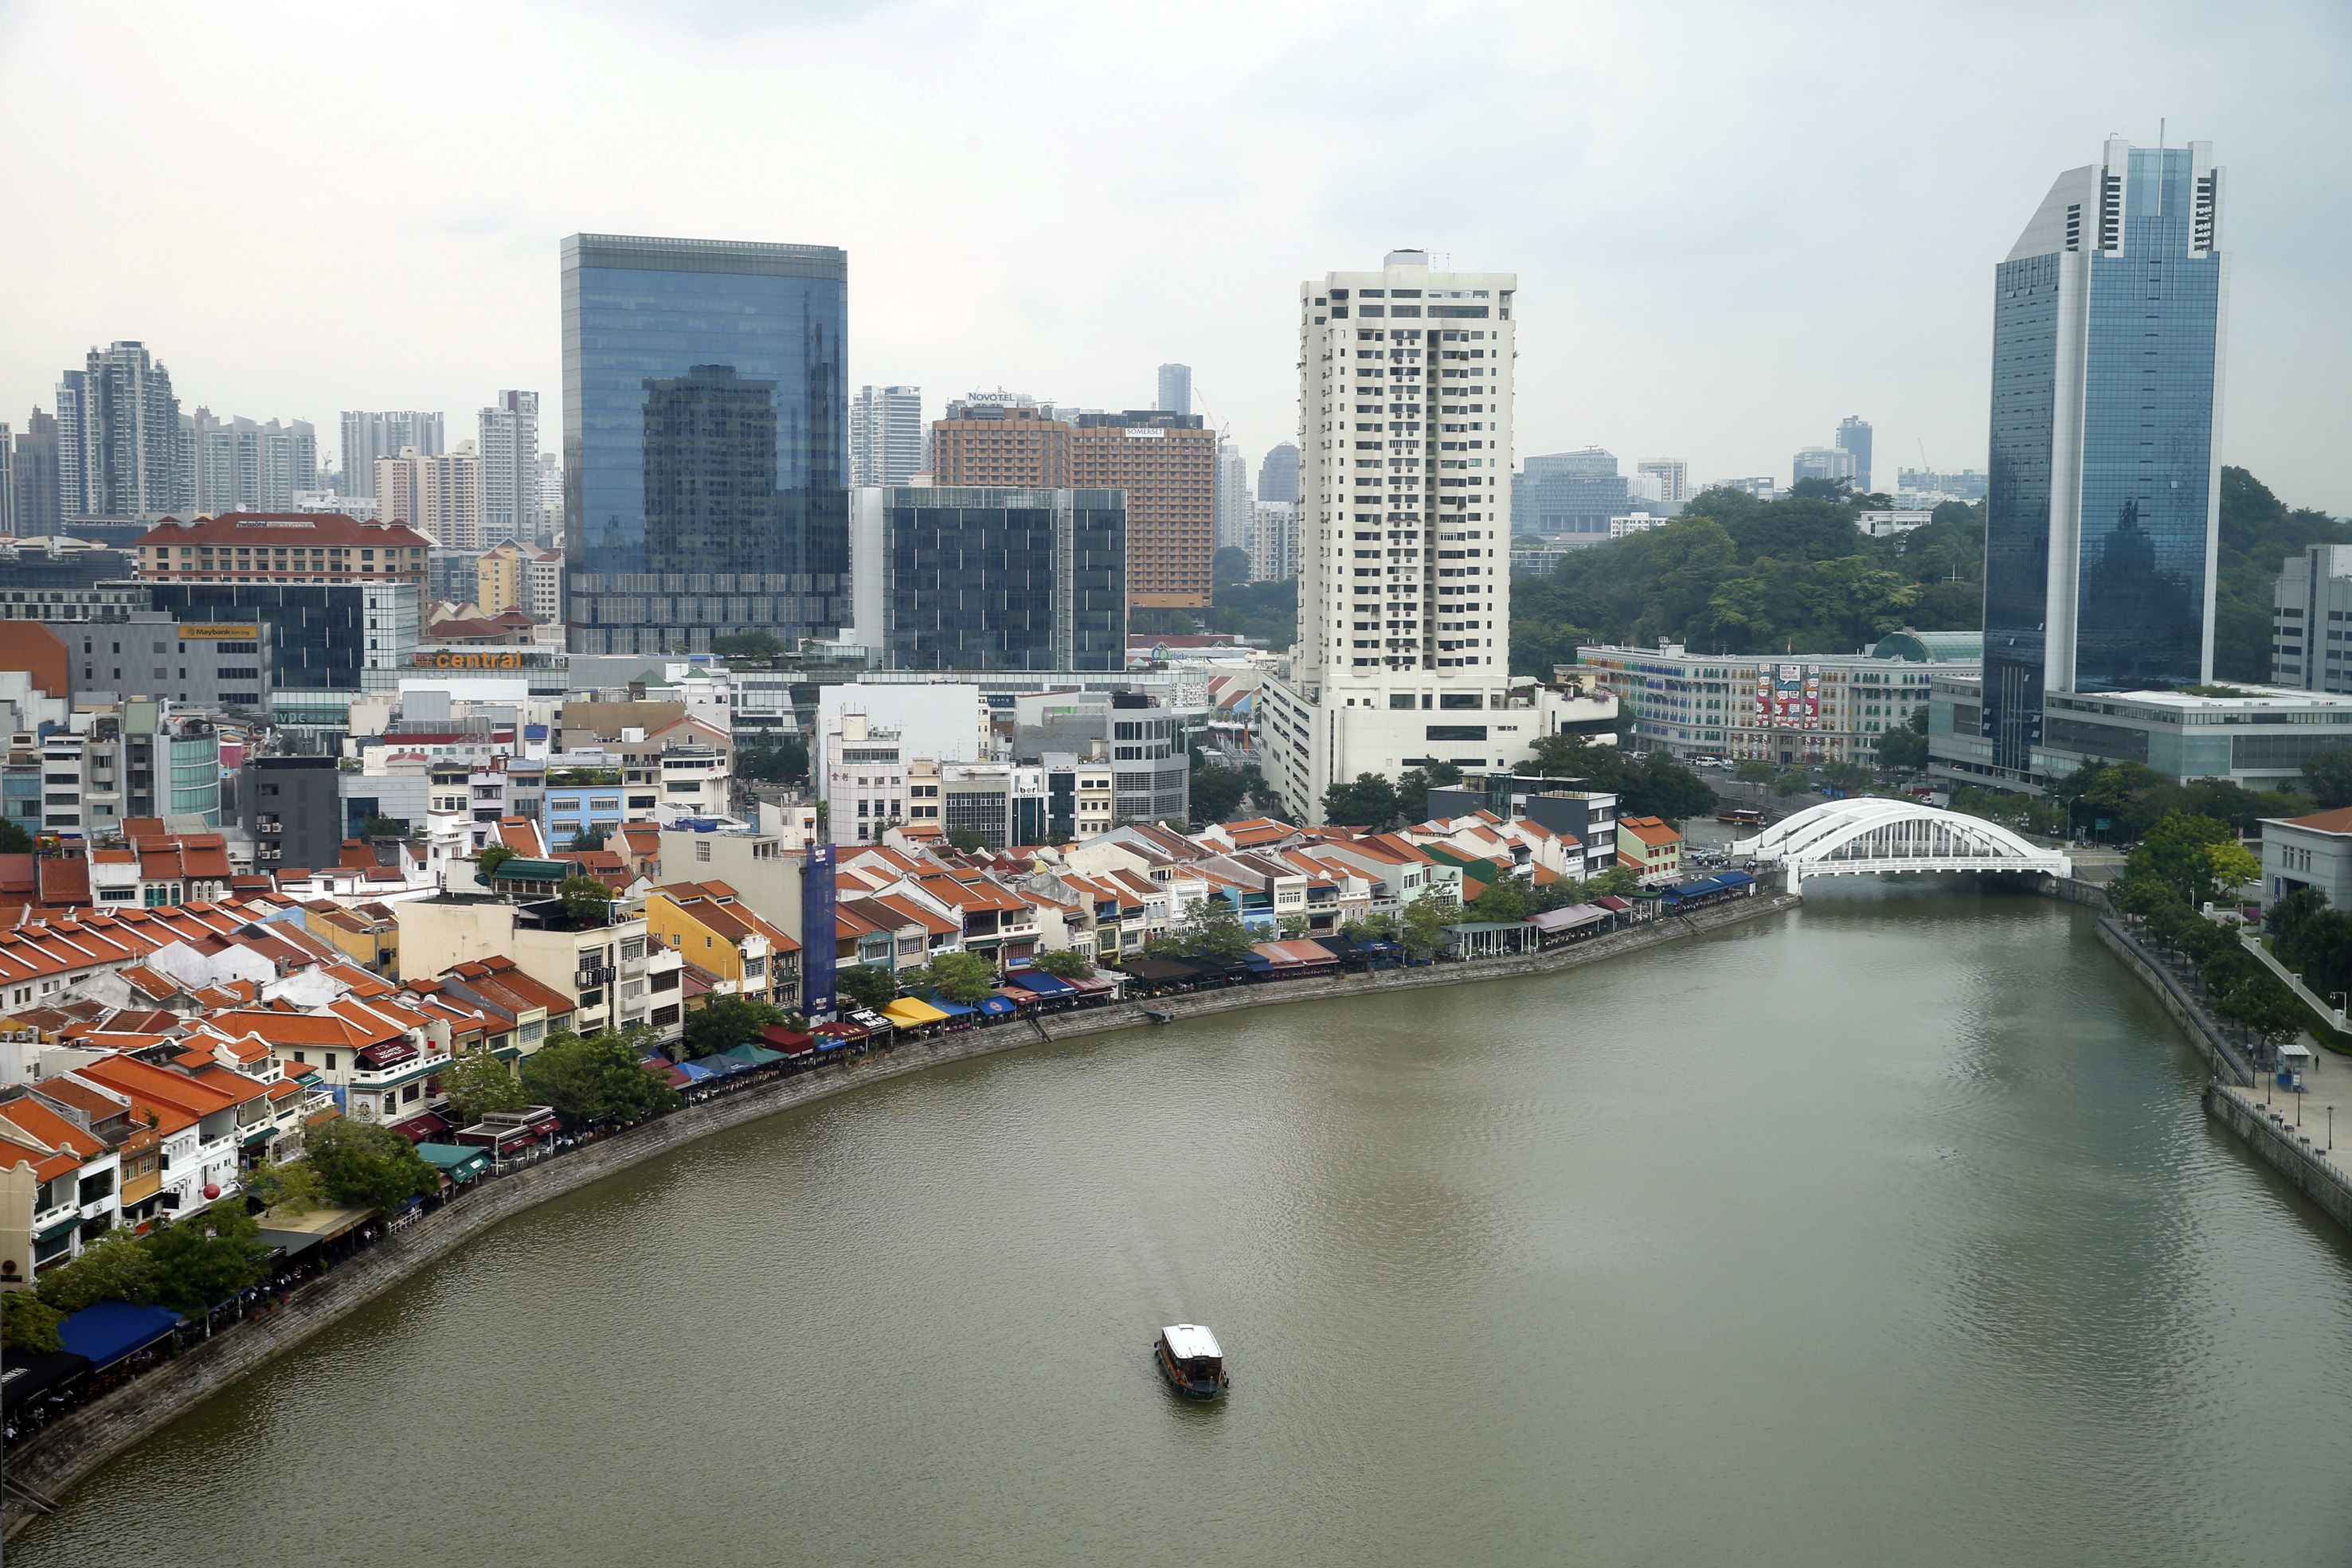 Boat Quay to get S$5m facelift next year, Government & Economy - THE ...